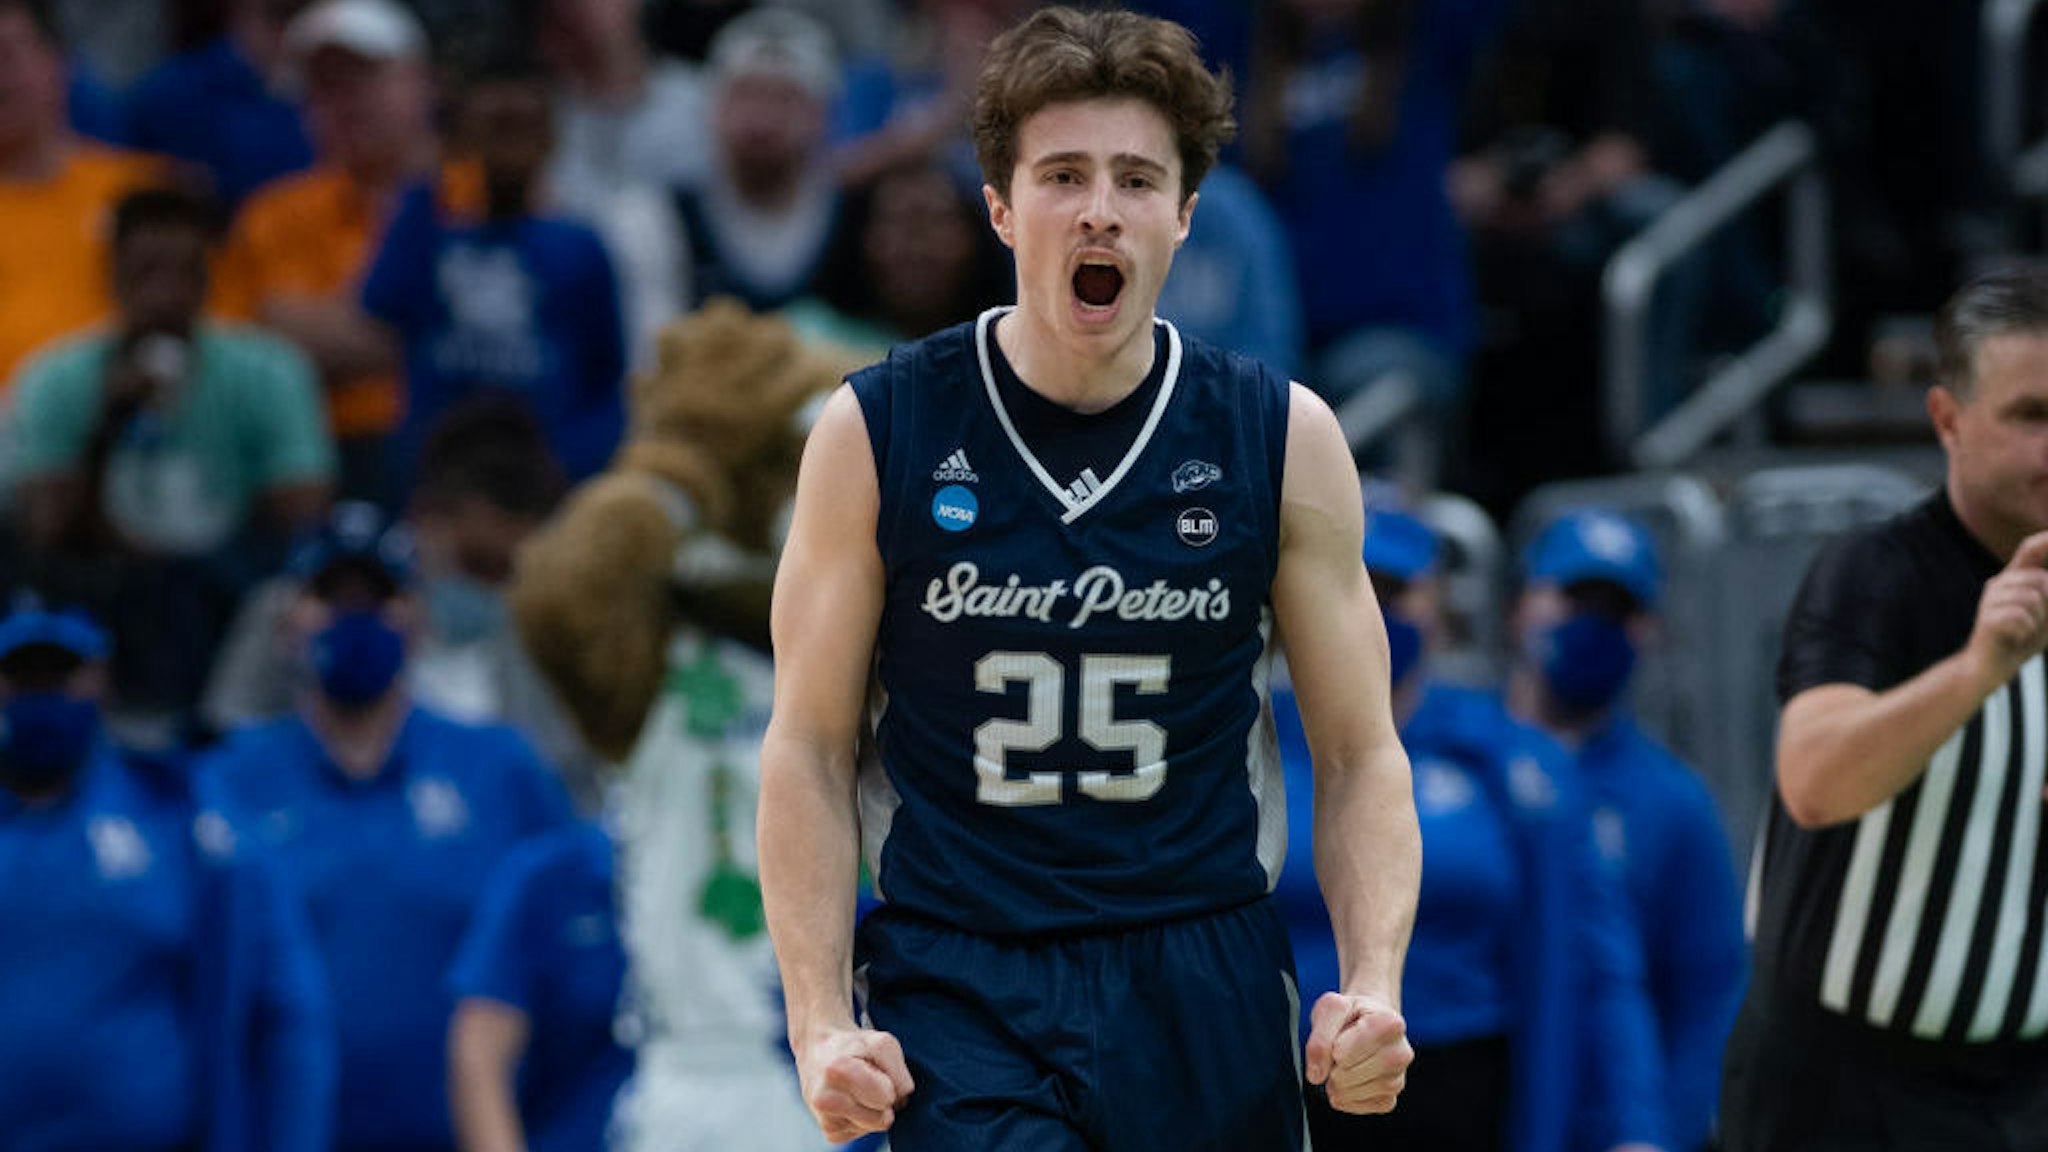 INDIANAPOLIS, IN - MARCH 17: Saint Peter's Peacocks guard Doug Edert (25) celebrates after a turnover during the mens March Madness college basketball game between the Kentucky Wildcats and Saint Peters Peacocks on March 17, 2022, at Gainbridge Fieldhouse in Indianapolis, IN. (Photo by Zach Bolinger/Icon Sportswire via Getty Images)